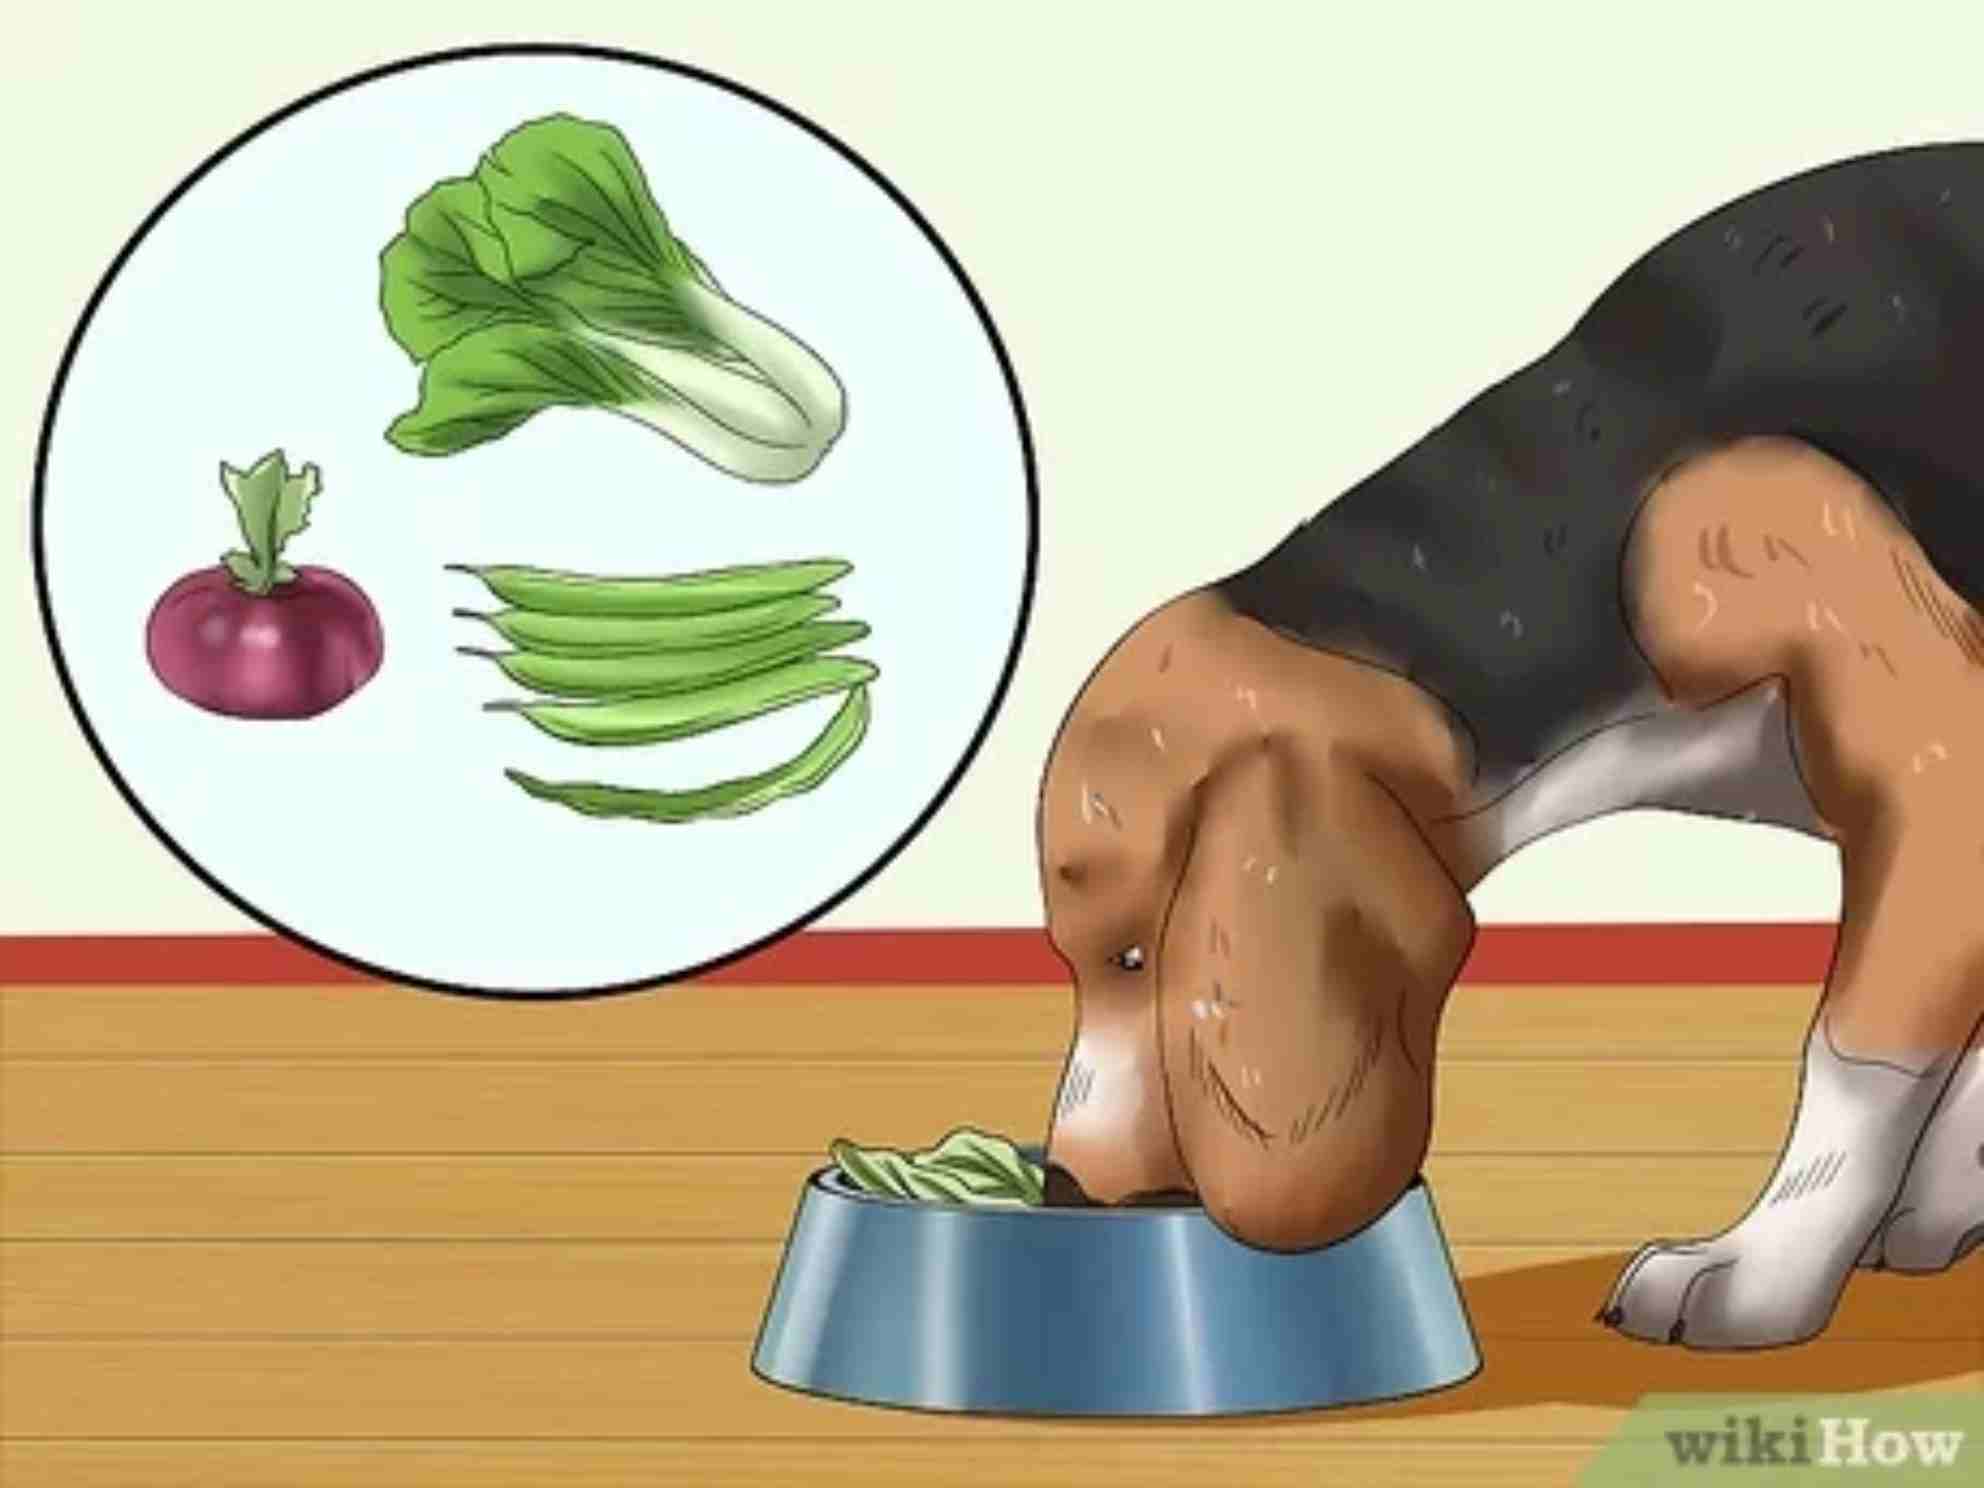 Prepare a healthy meal for your dog